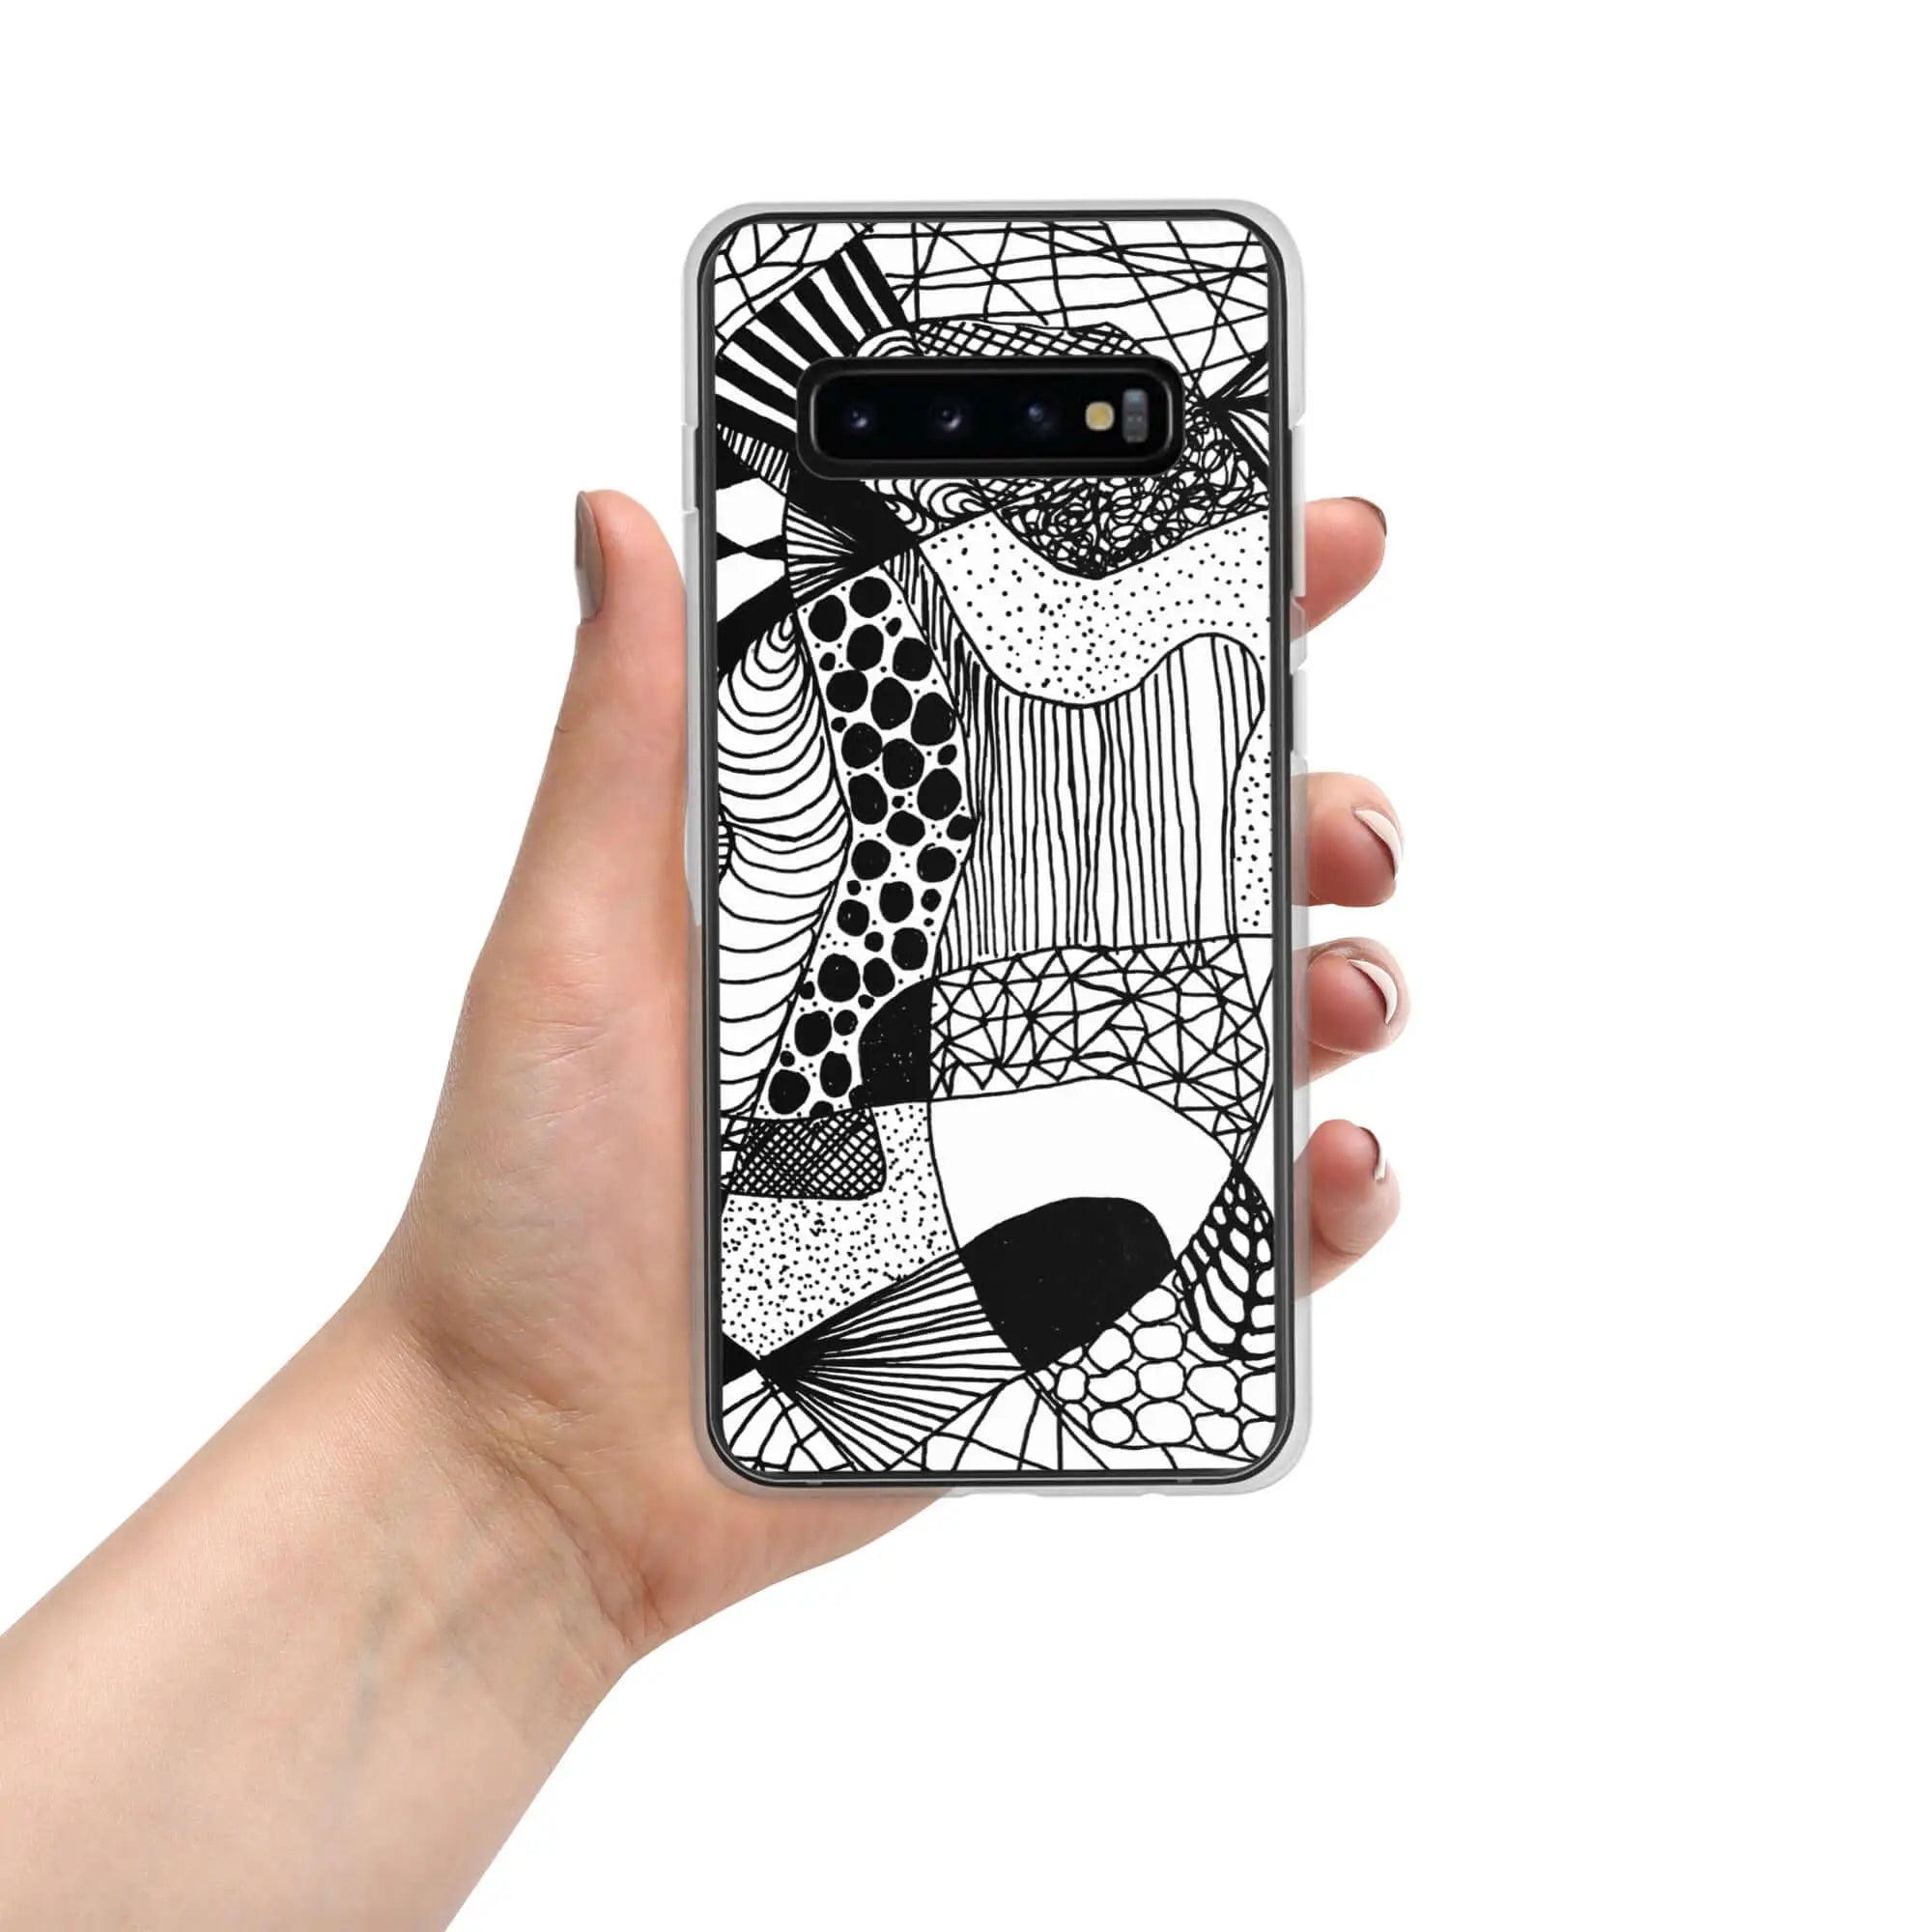 Samsung Graphic Abstract Phone Case in Black and White Pattern